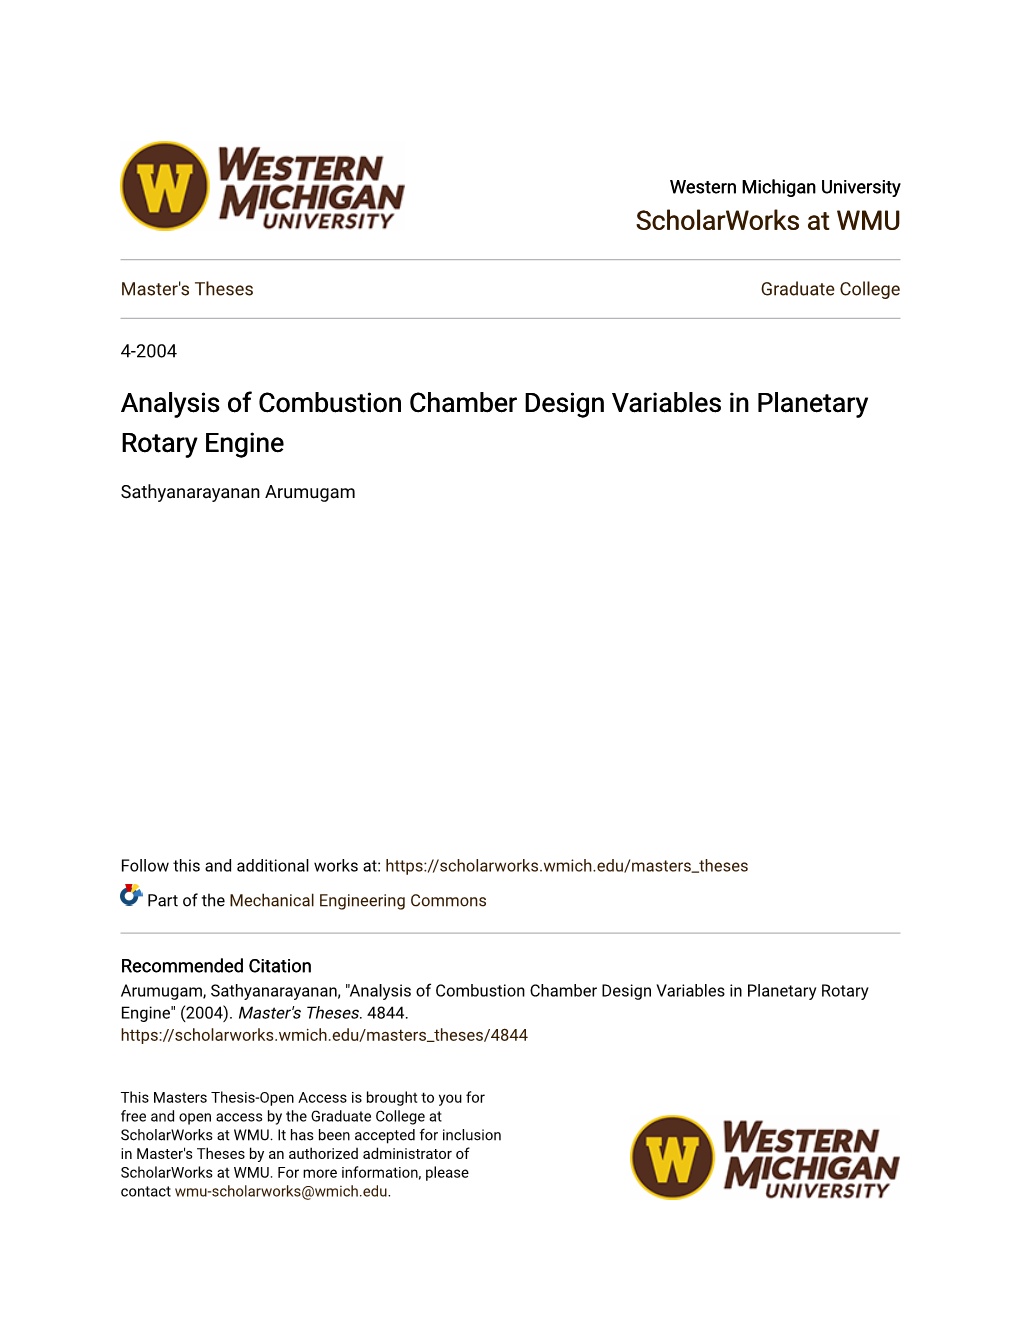 Analysis of Combustion Chamber Design Variables in Planetary Rotary Engine